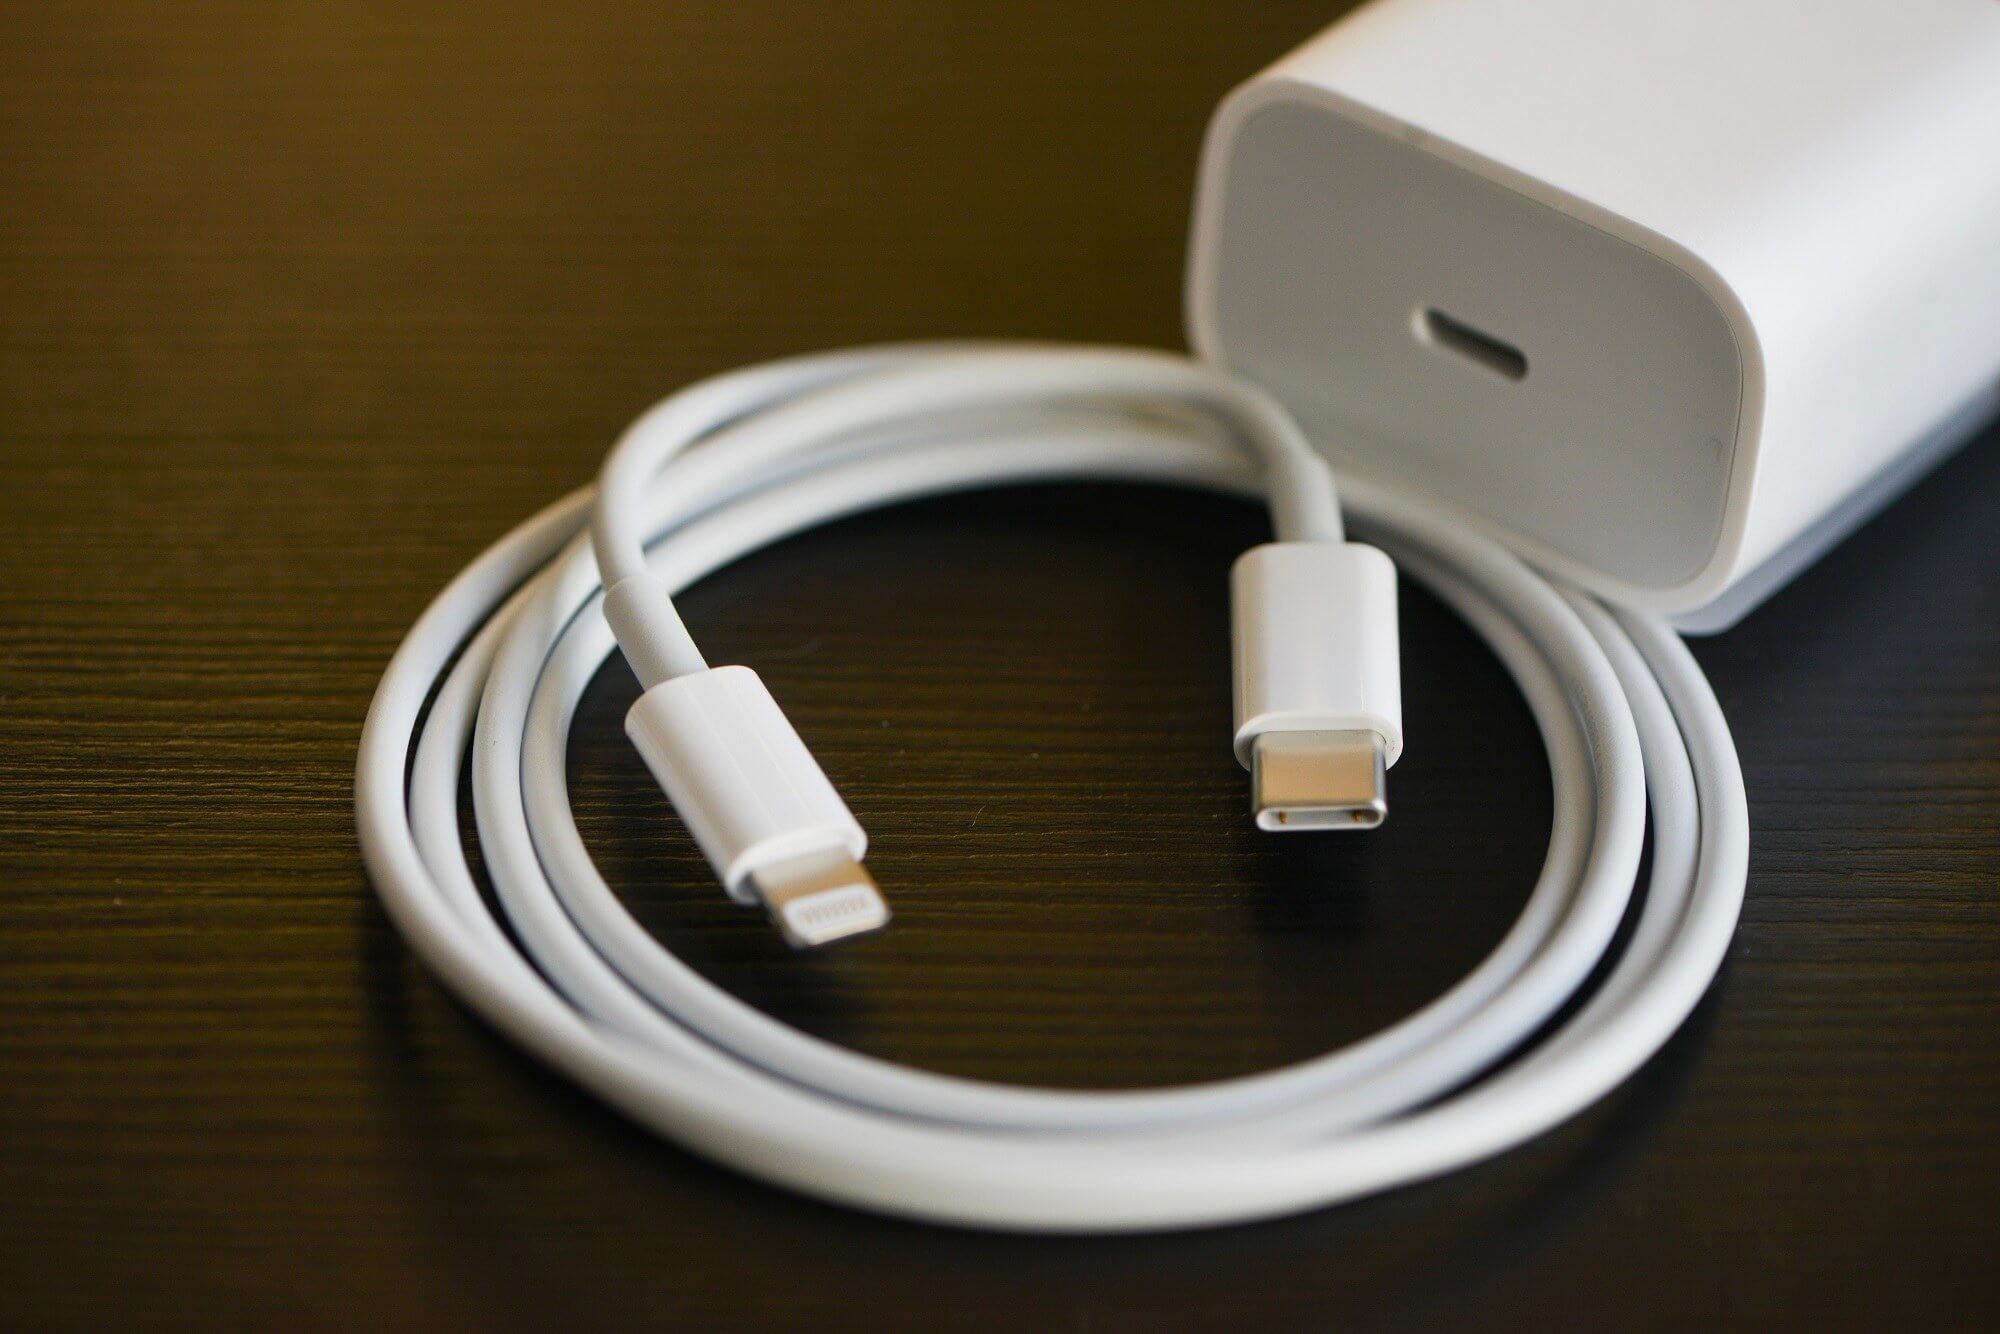 Brazilian judge tells Apple to compensate iPhone customer $1,000 for not including charger in box